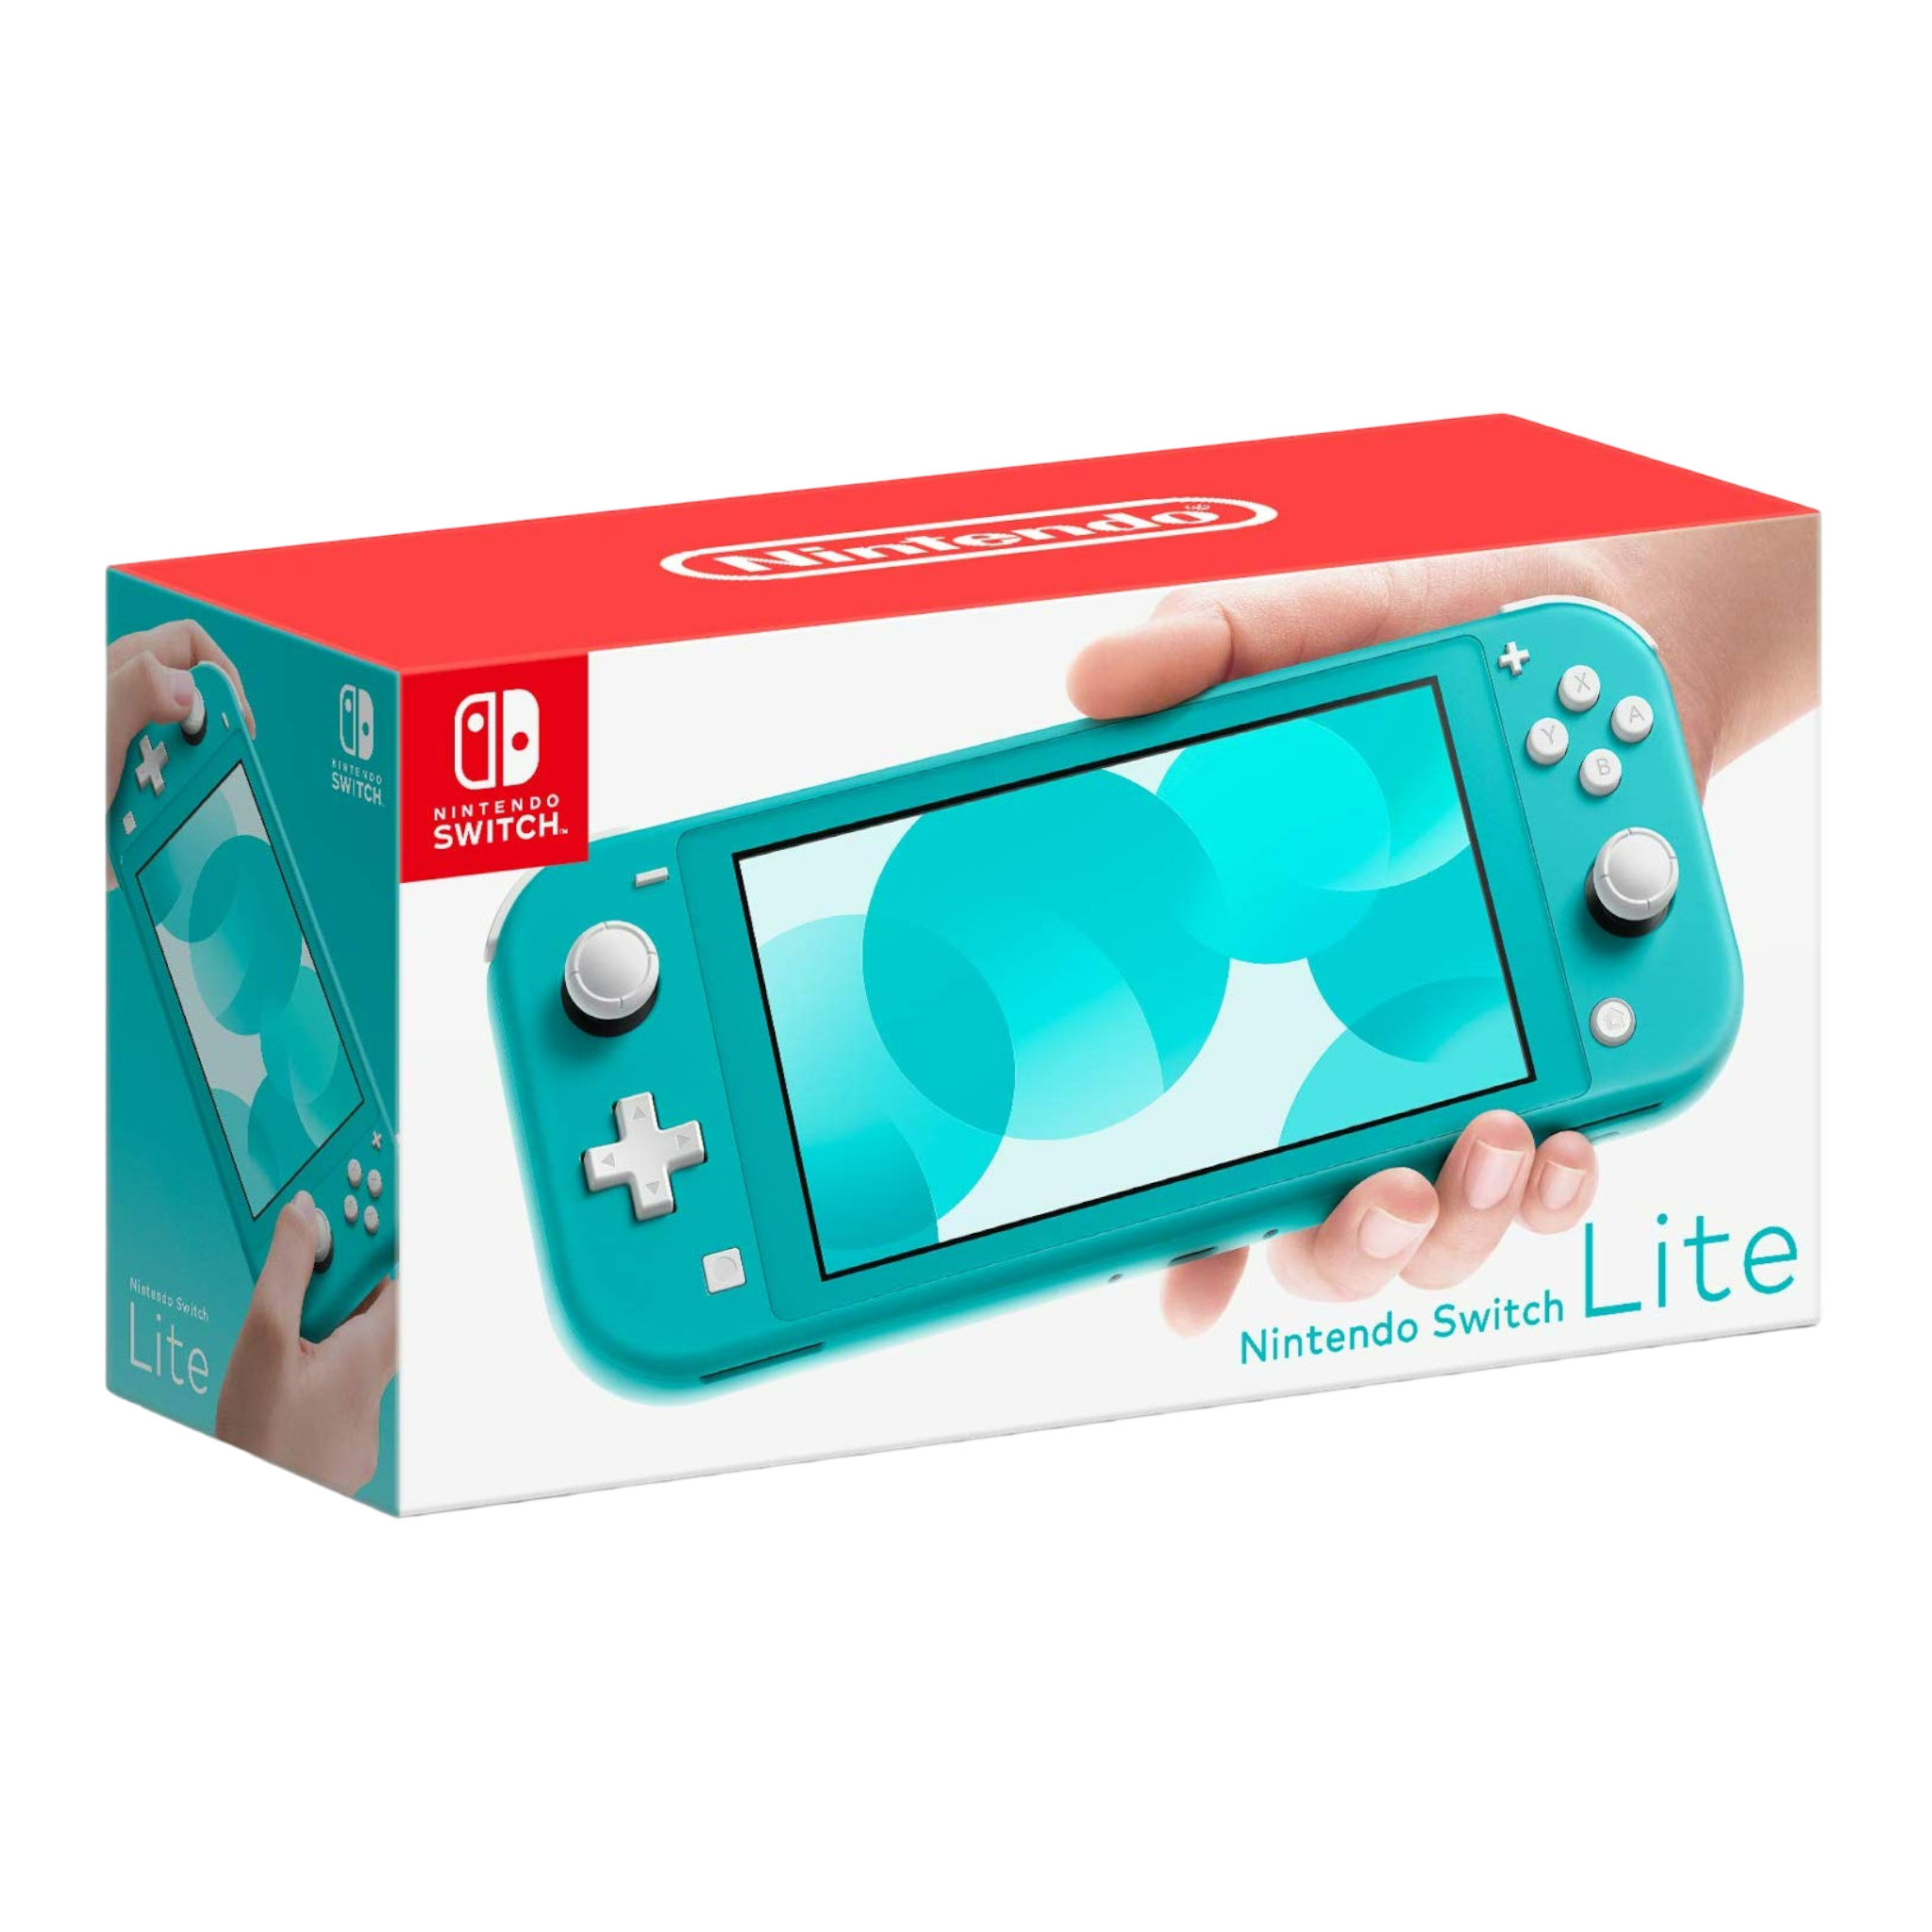 Nintendo Switch Lite 32GB Handheld Video Game Console - Turquoise - Pro-Distributing